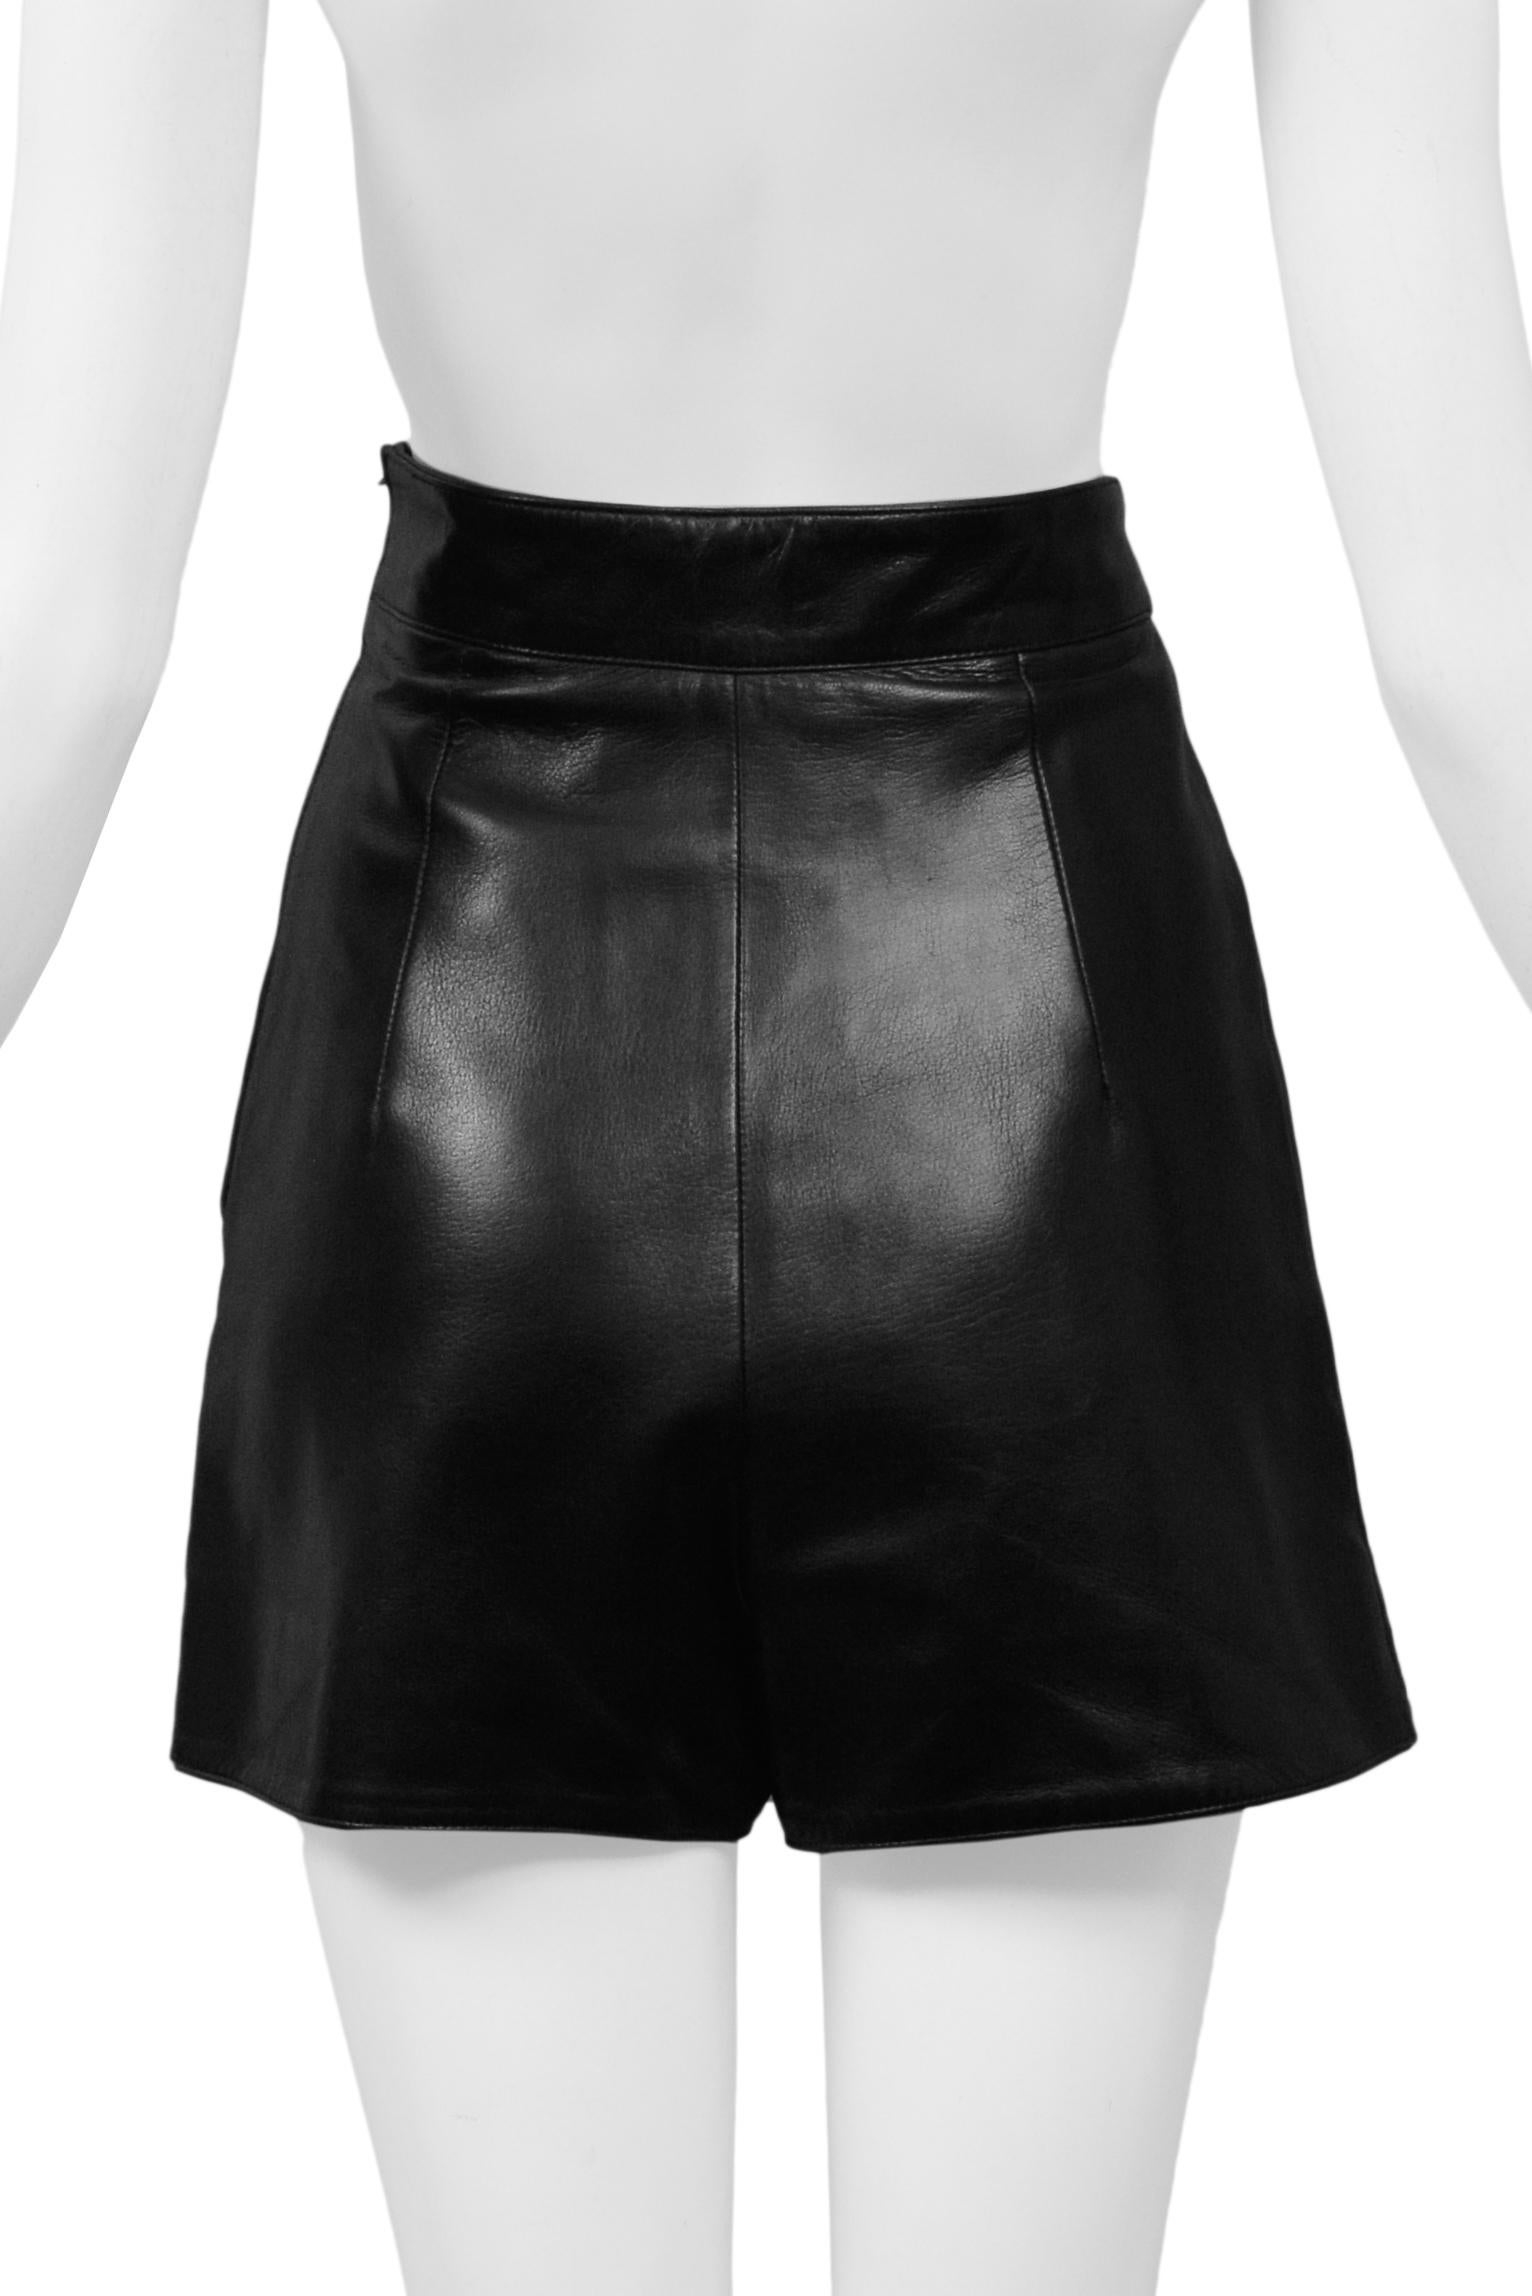 Claude Montana Black Leather Shorts with Gold Zippers For Sale 1